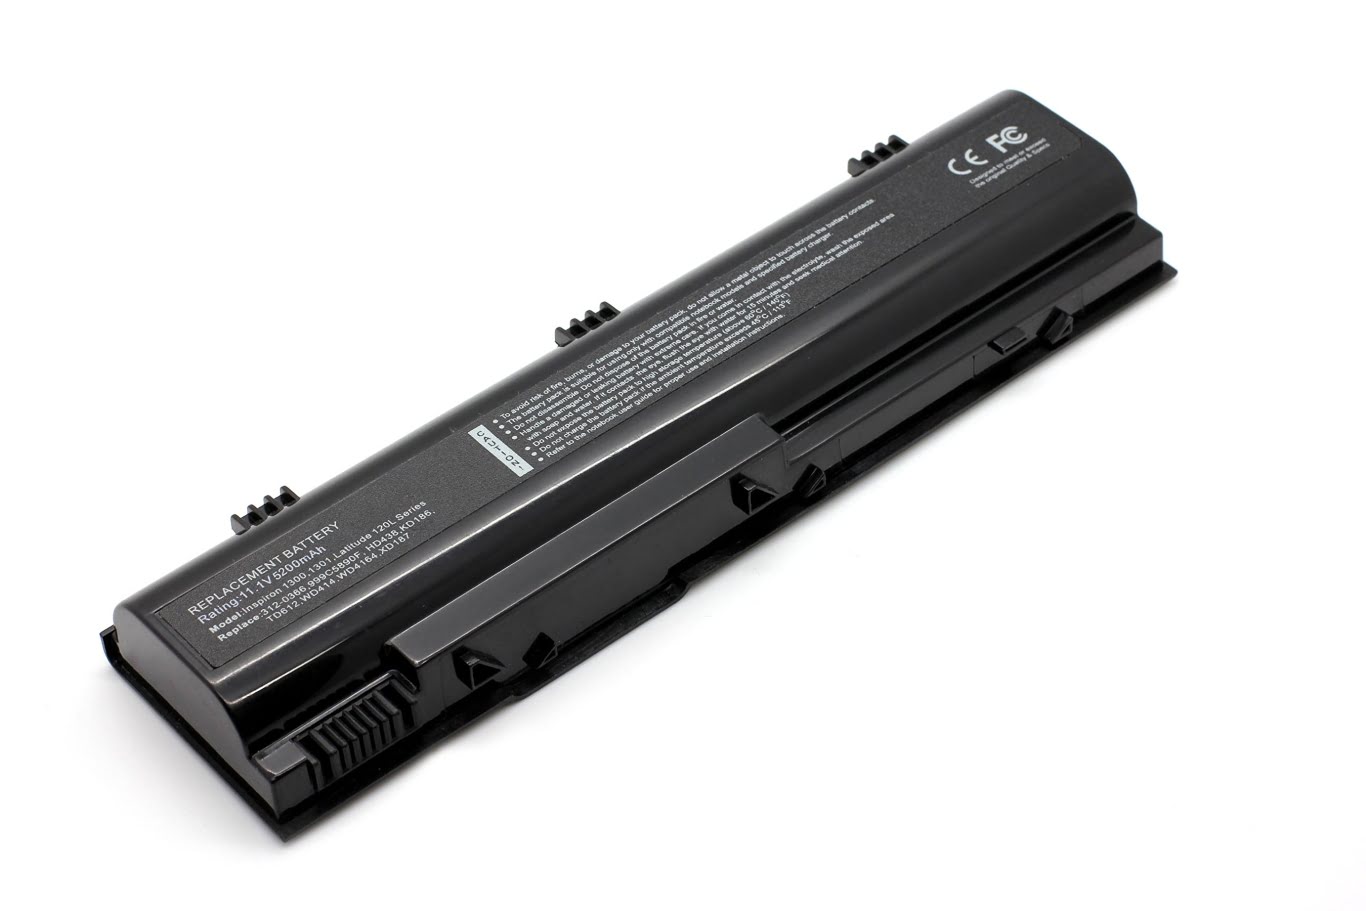 Dell 0hd438, 0hj481 Laptop Battery For Inspiron 1300, Inspiron B120 replacement